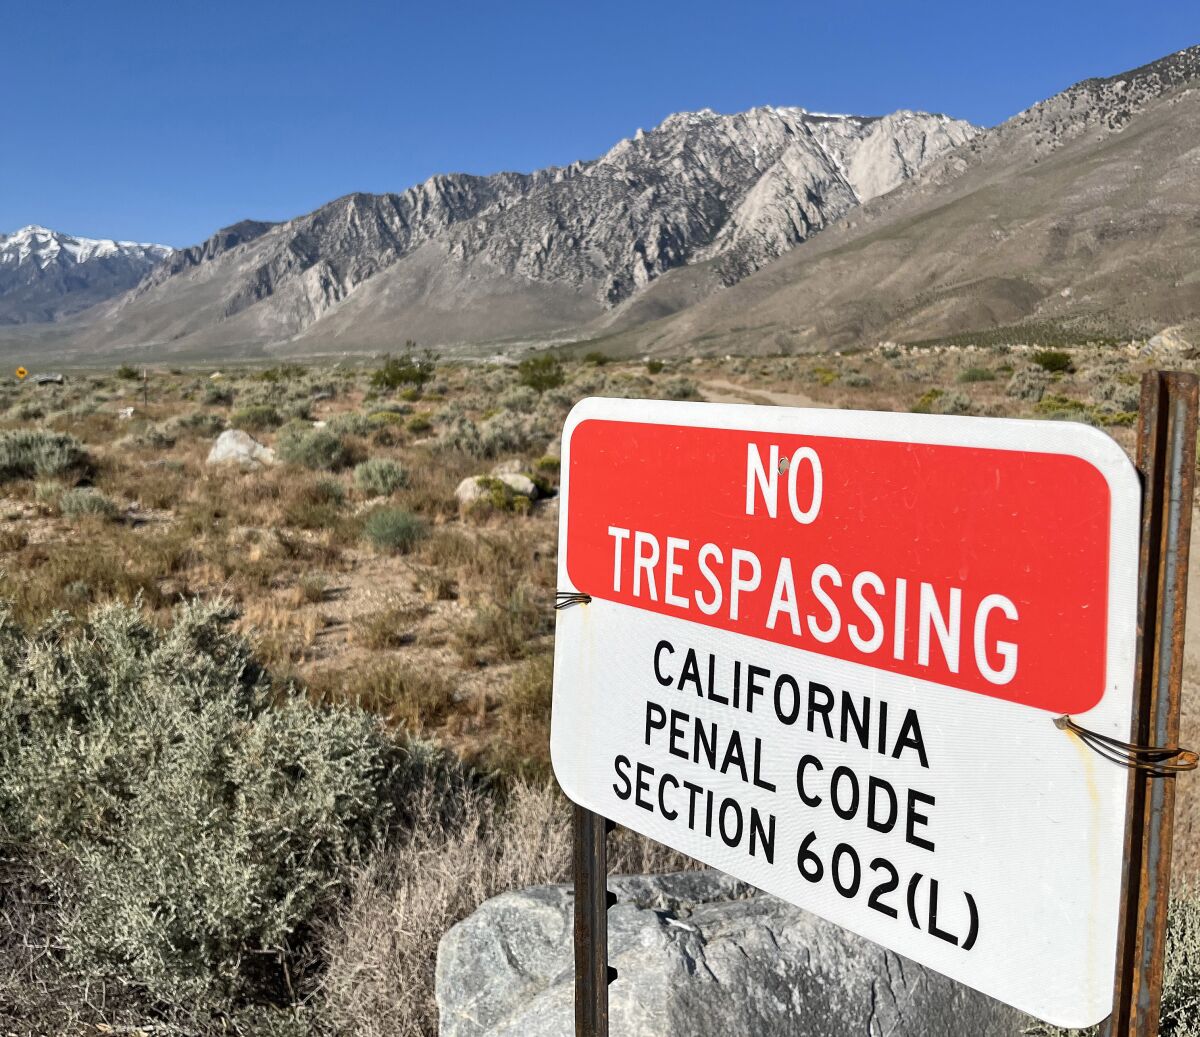 A "no trespassing" sign with mountains in the background.